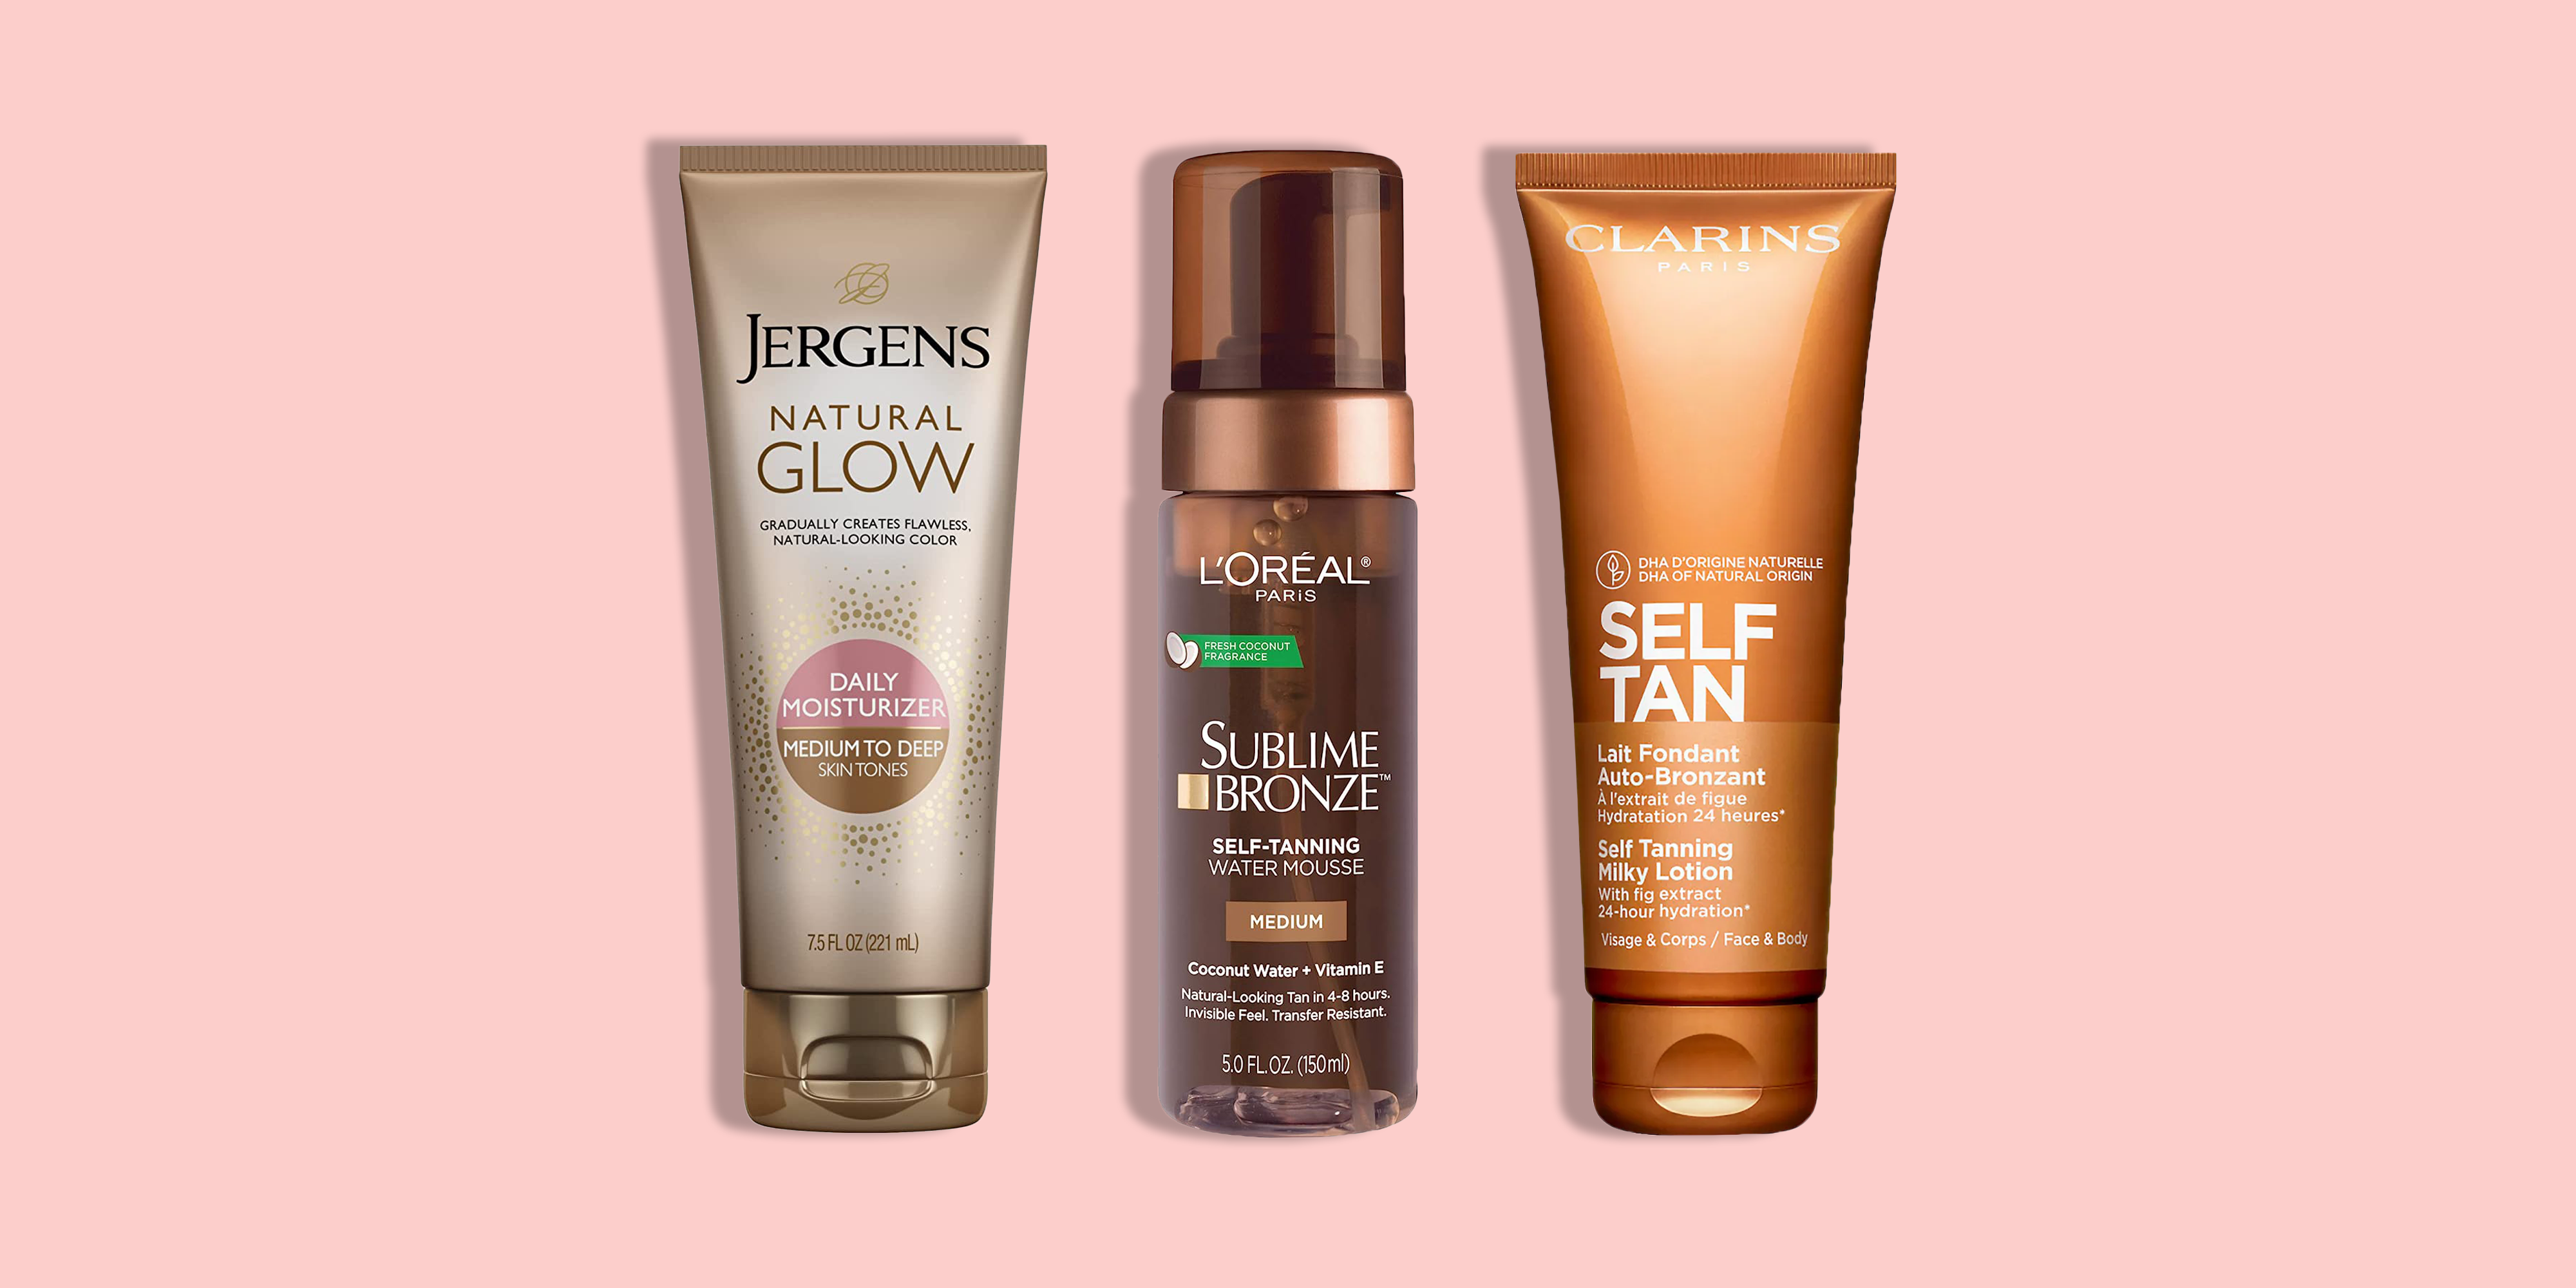 7 Tanning Lamps Compared: Which Gives the Best Bronze Glow